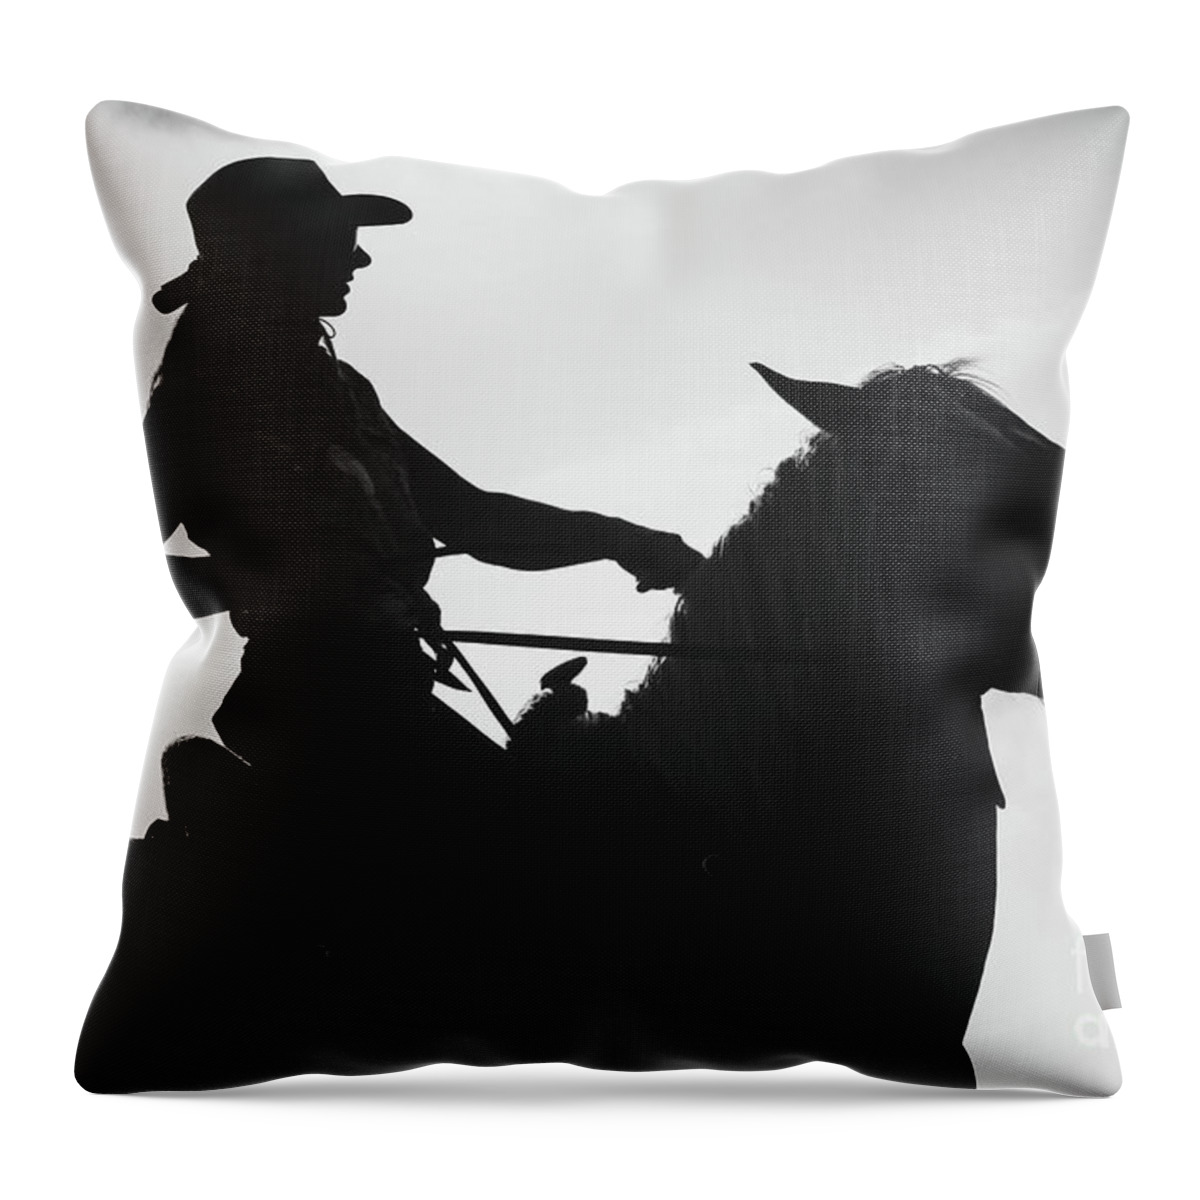 Horse Throw Pillow featuring the photograph Cowgirl and horse silhouette by Dimitar Hristov